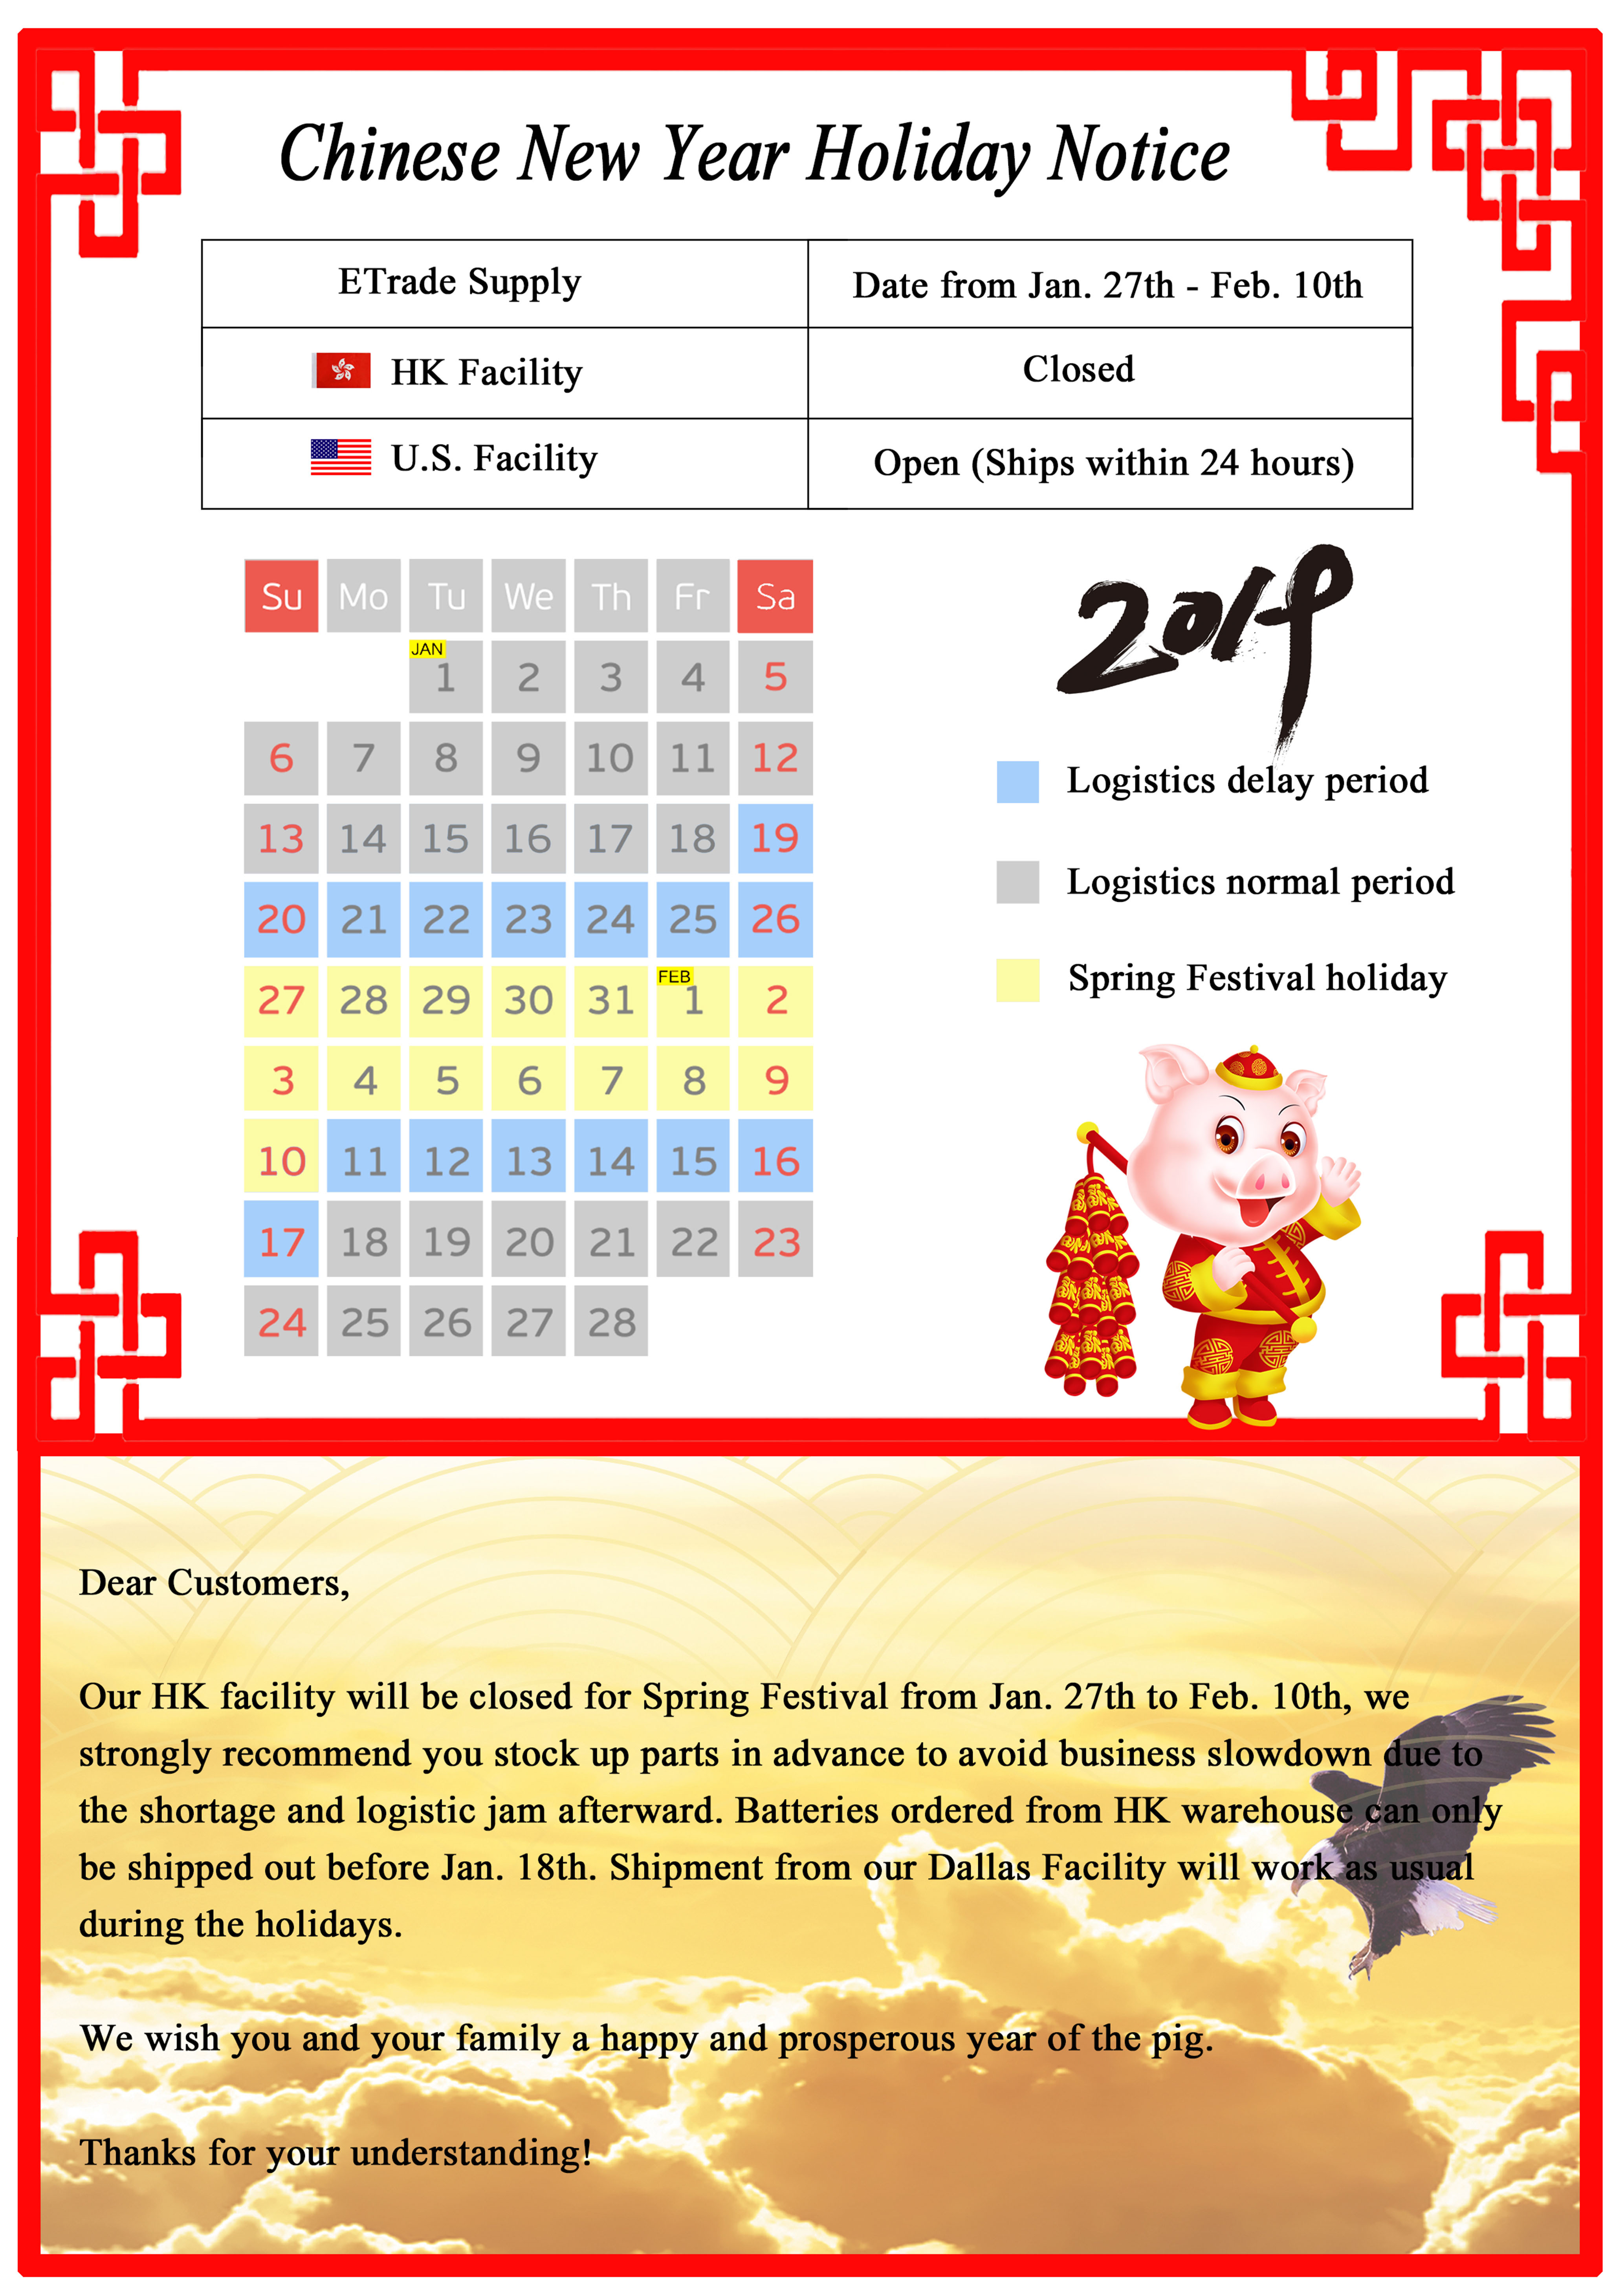 ETrade Supply 2019 Chinese New Year Holiday Notice